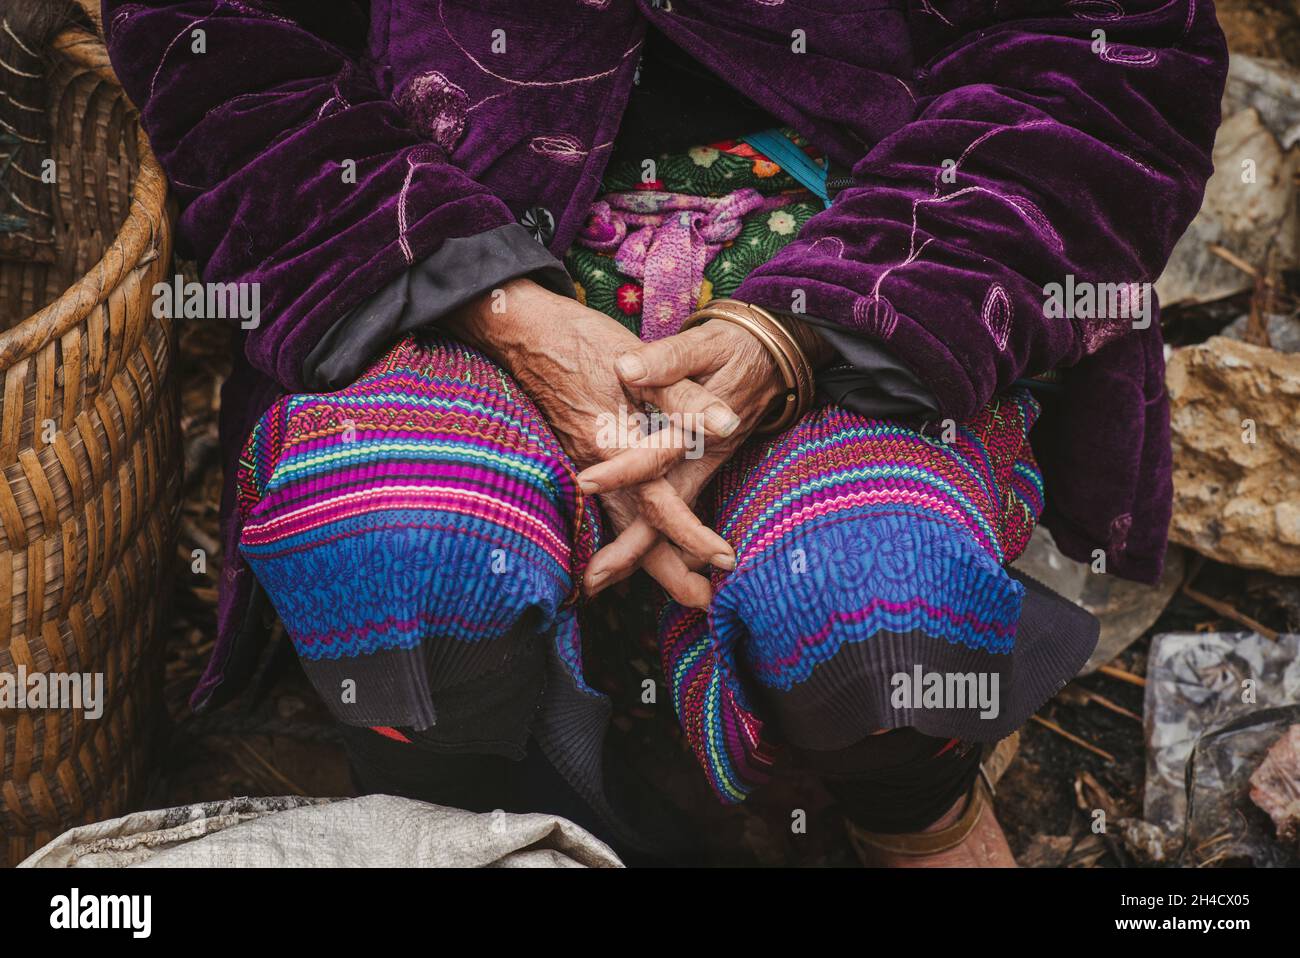 Hands of ethnically diverse senior citizen at the Can Cau market in Vietnam Stock Photo